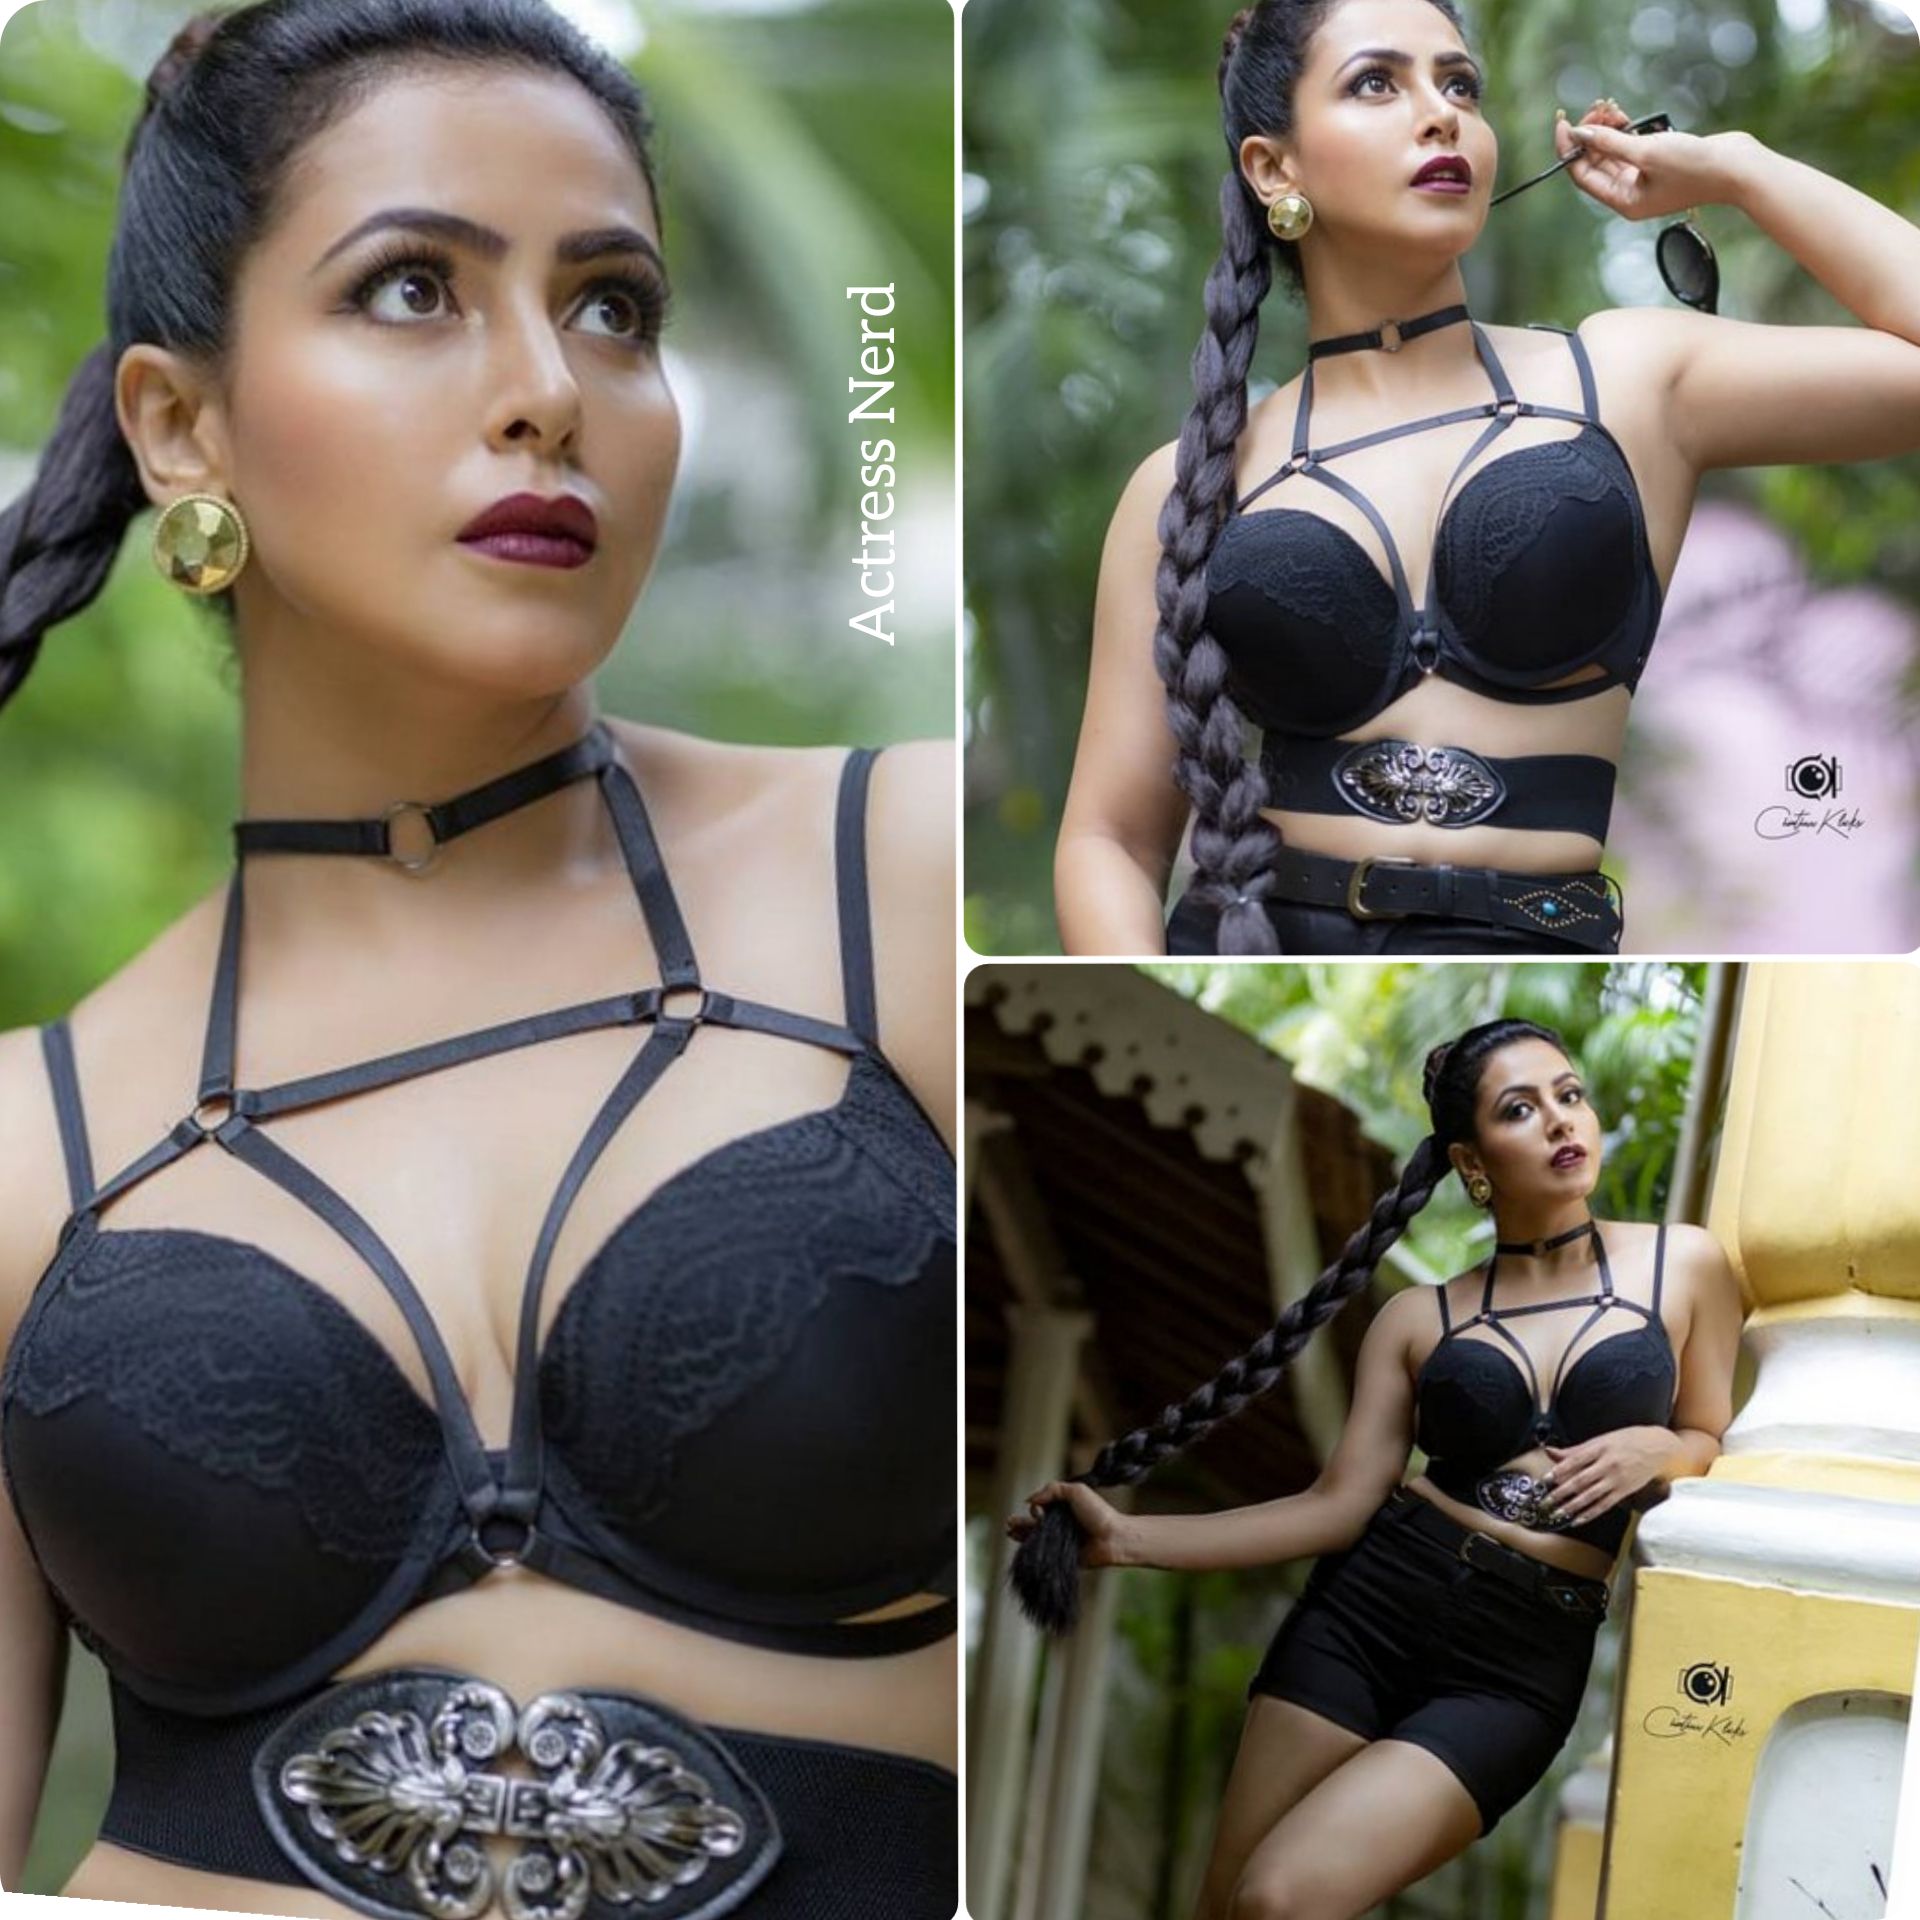 Actress_Nerd🤓 on X: #NandiniRai in epic #lingerie ♣️ such fine and big 34D  breasts. give us a chance we will take care of them 😉😋😍 #Black #boobs  #ActressNerd 🤓  / X